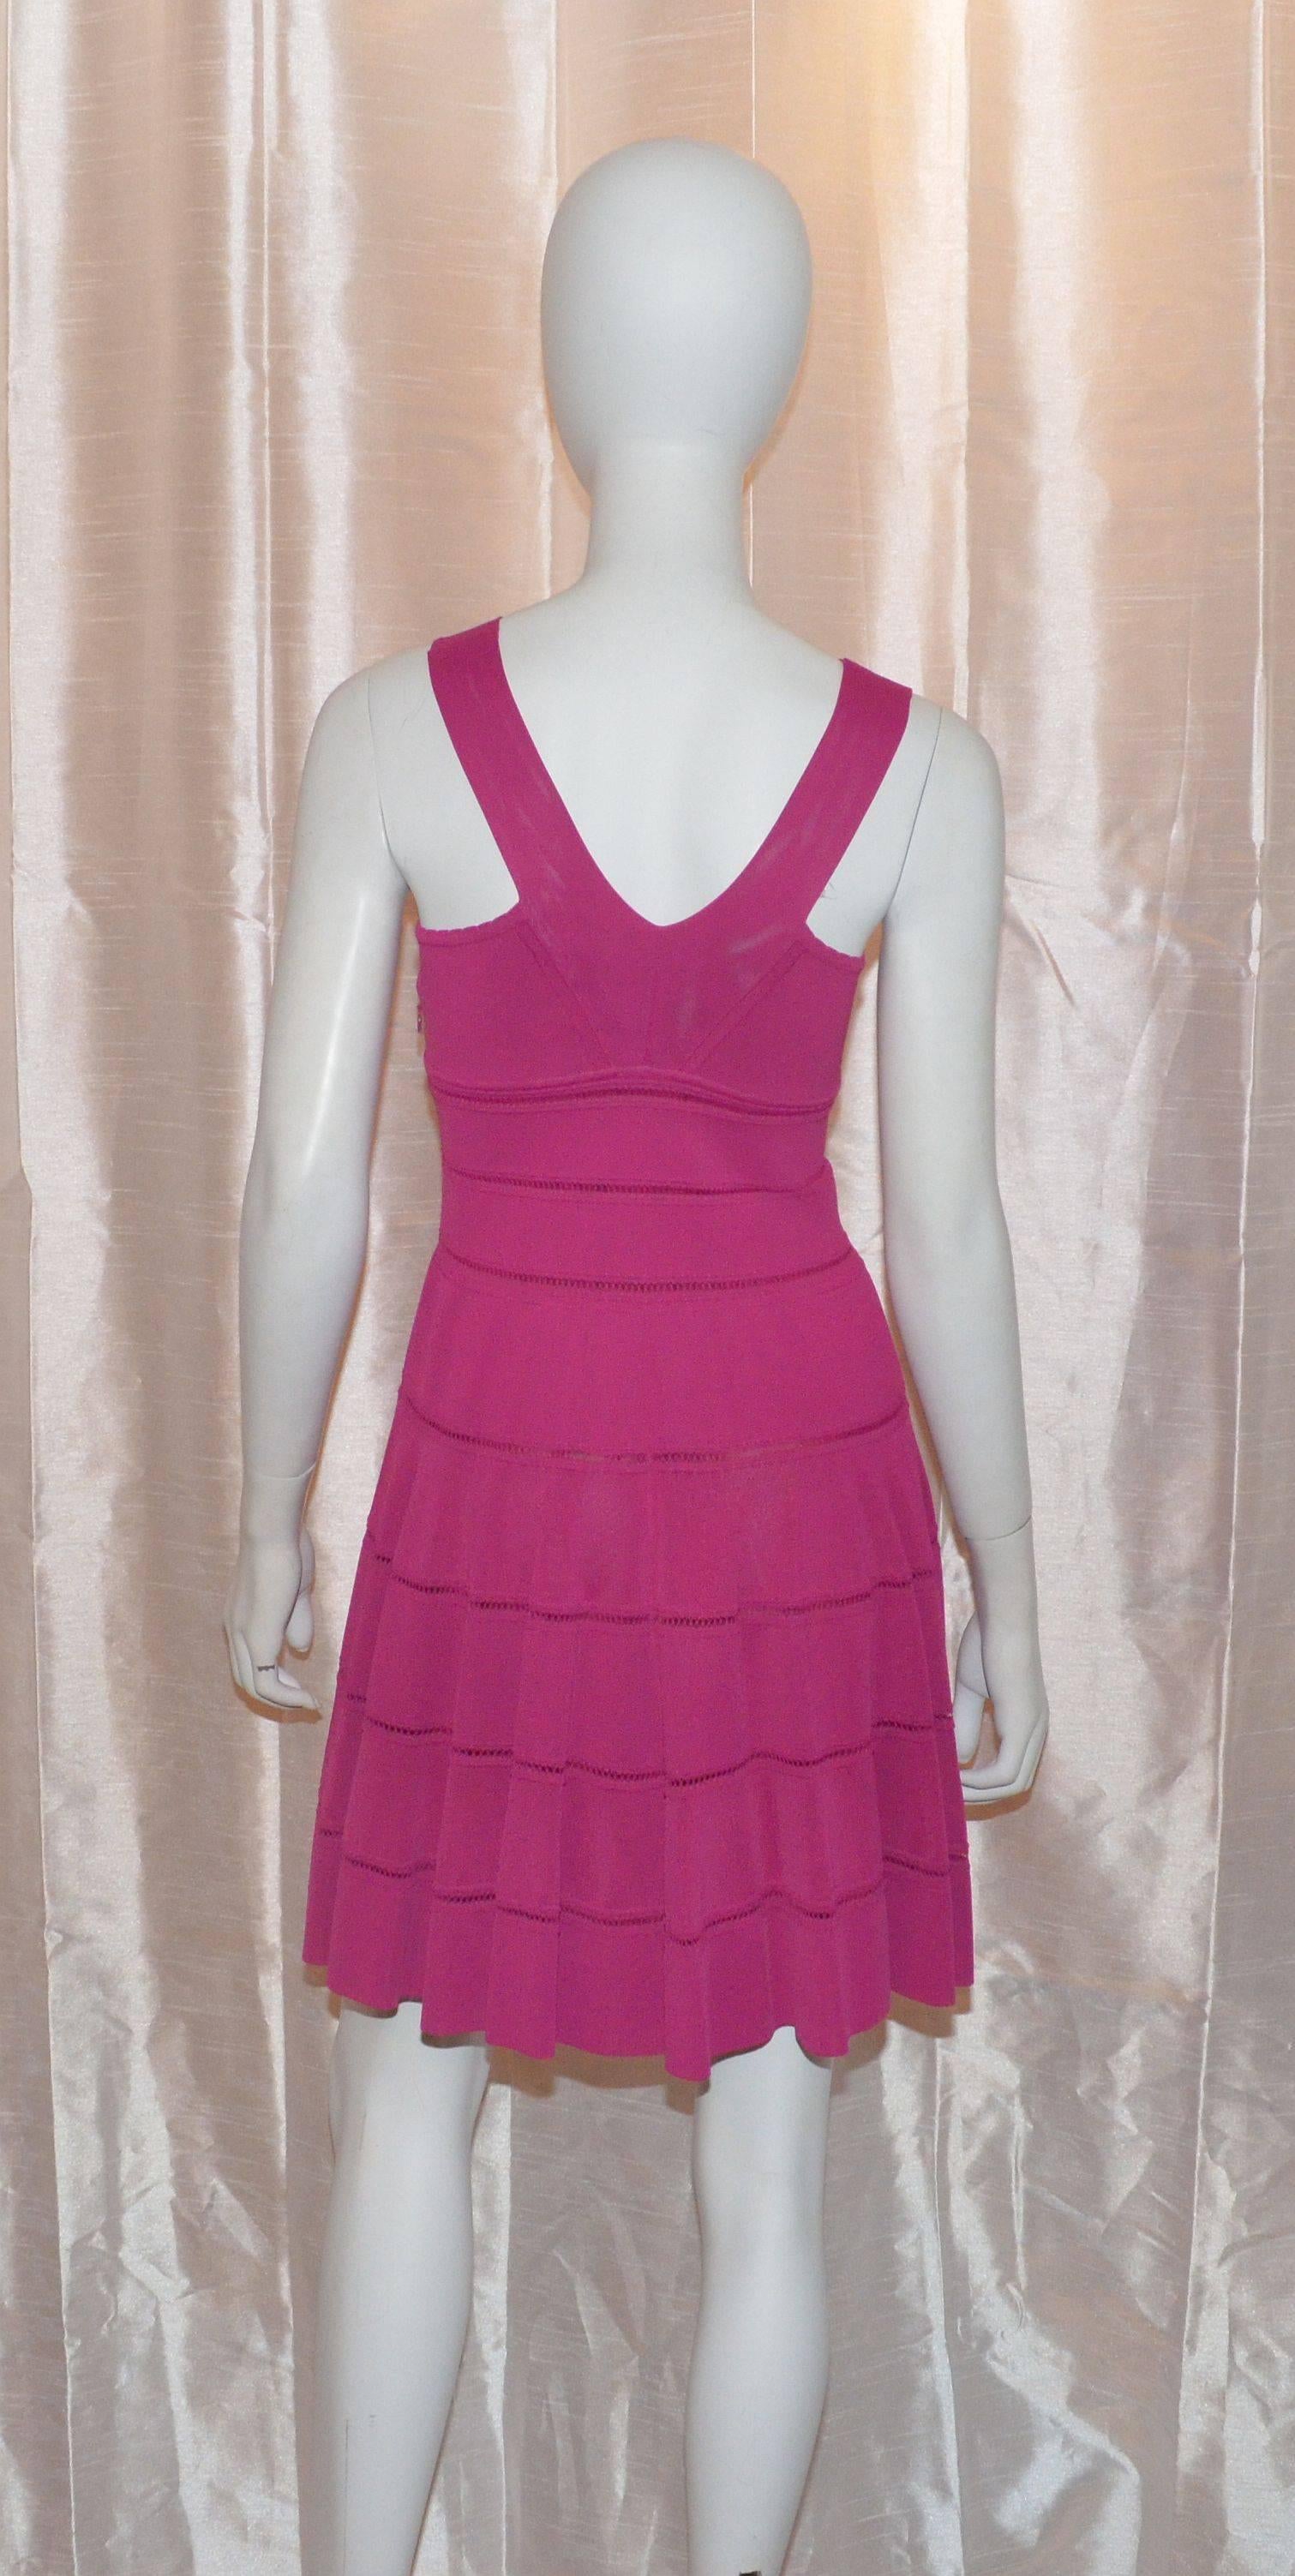 Pink Christian Dior Fit n Flare Dress